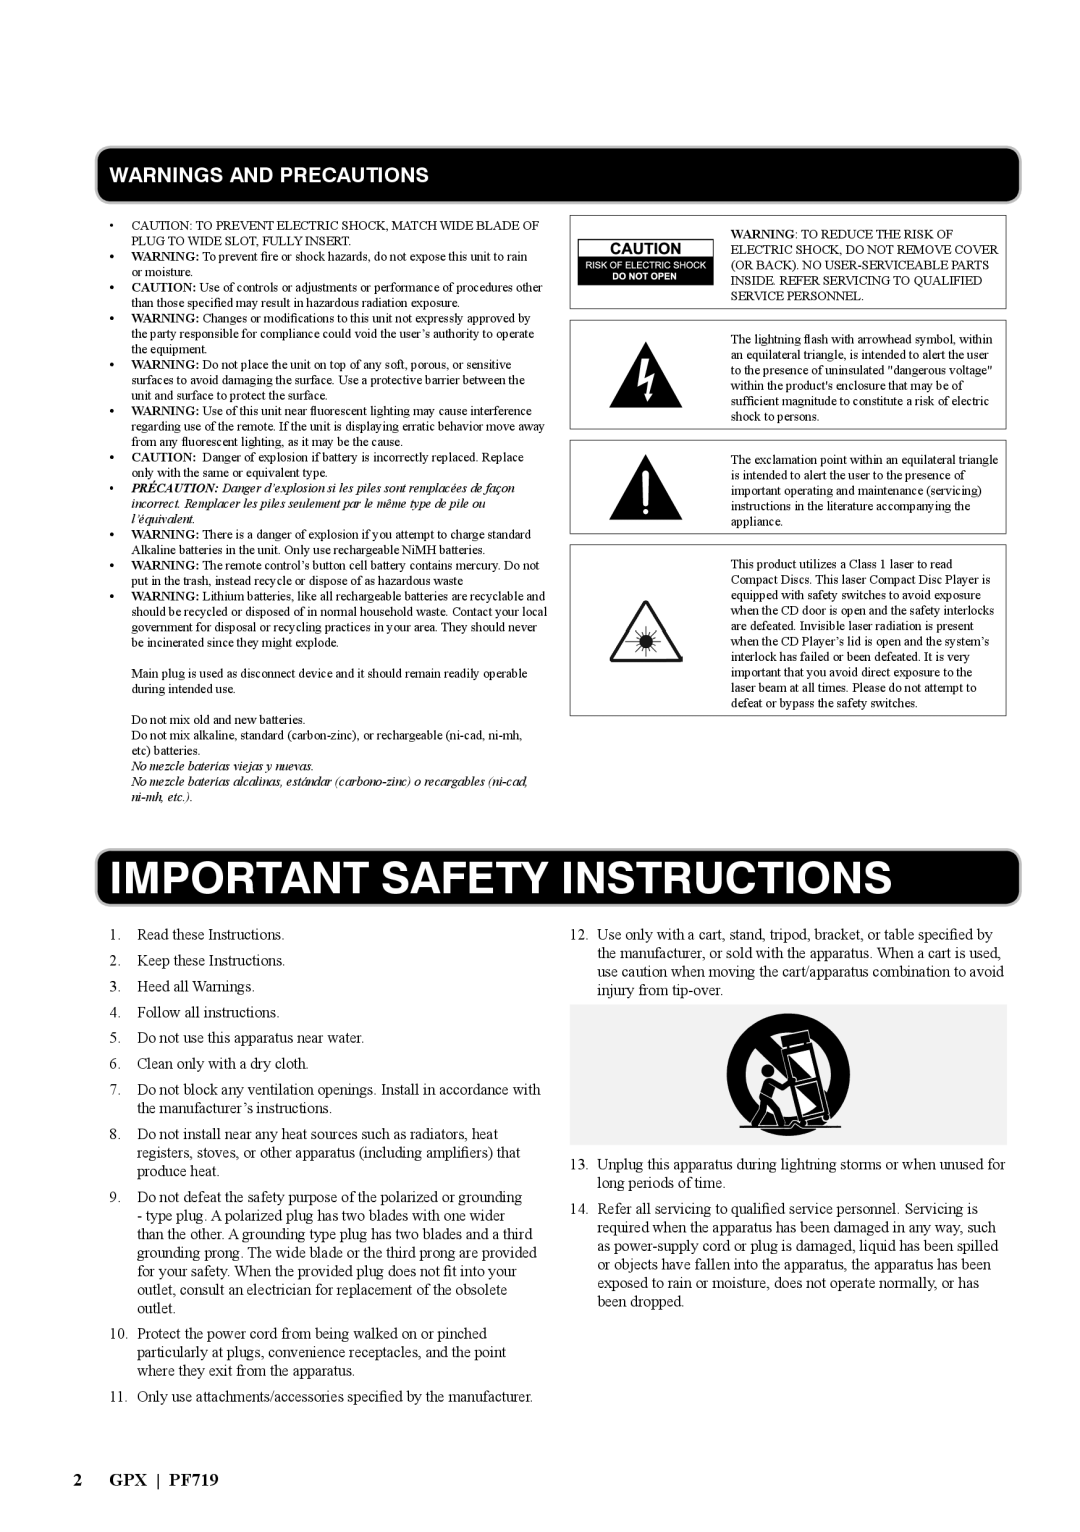 GPX manual Important Safety Instructions, Warnings And Precautions, GPX PF719 